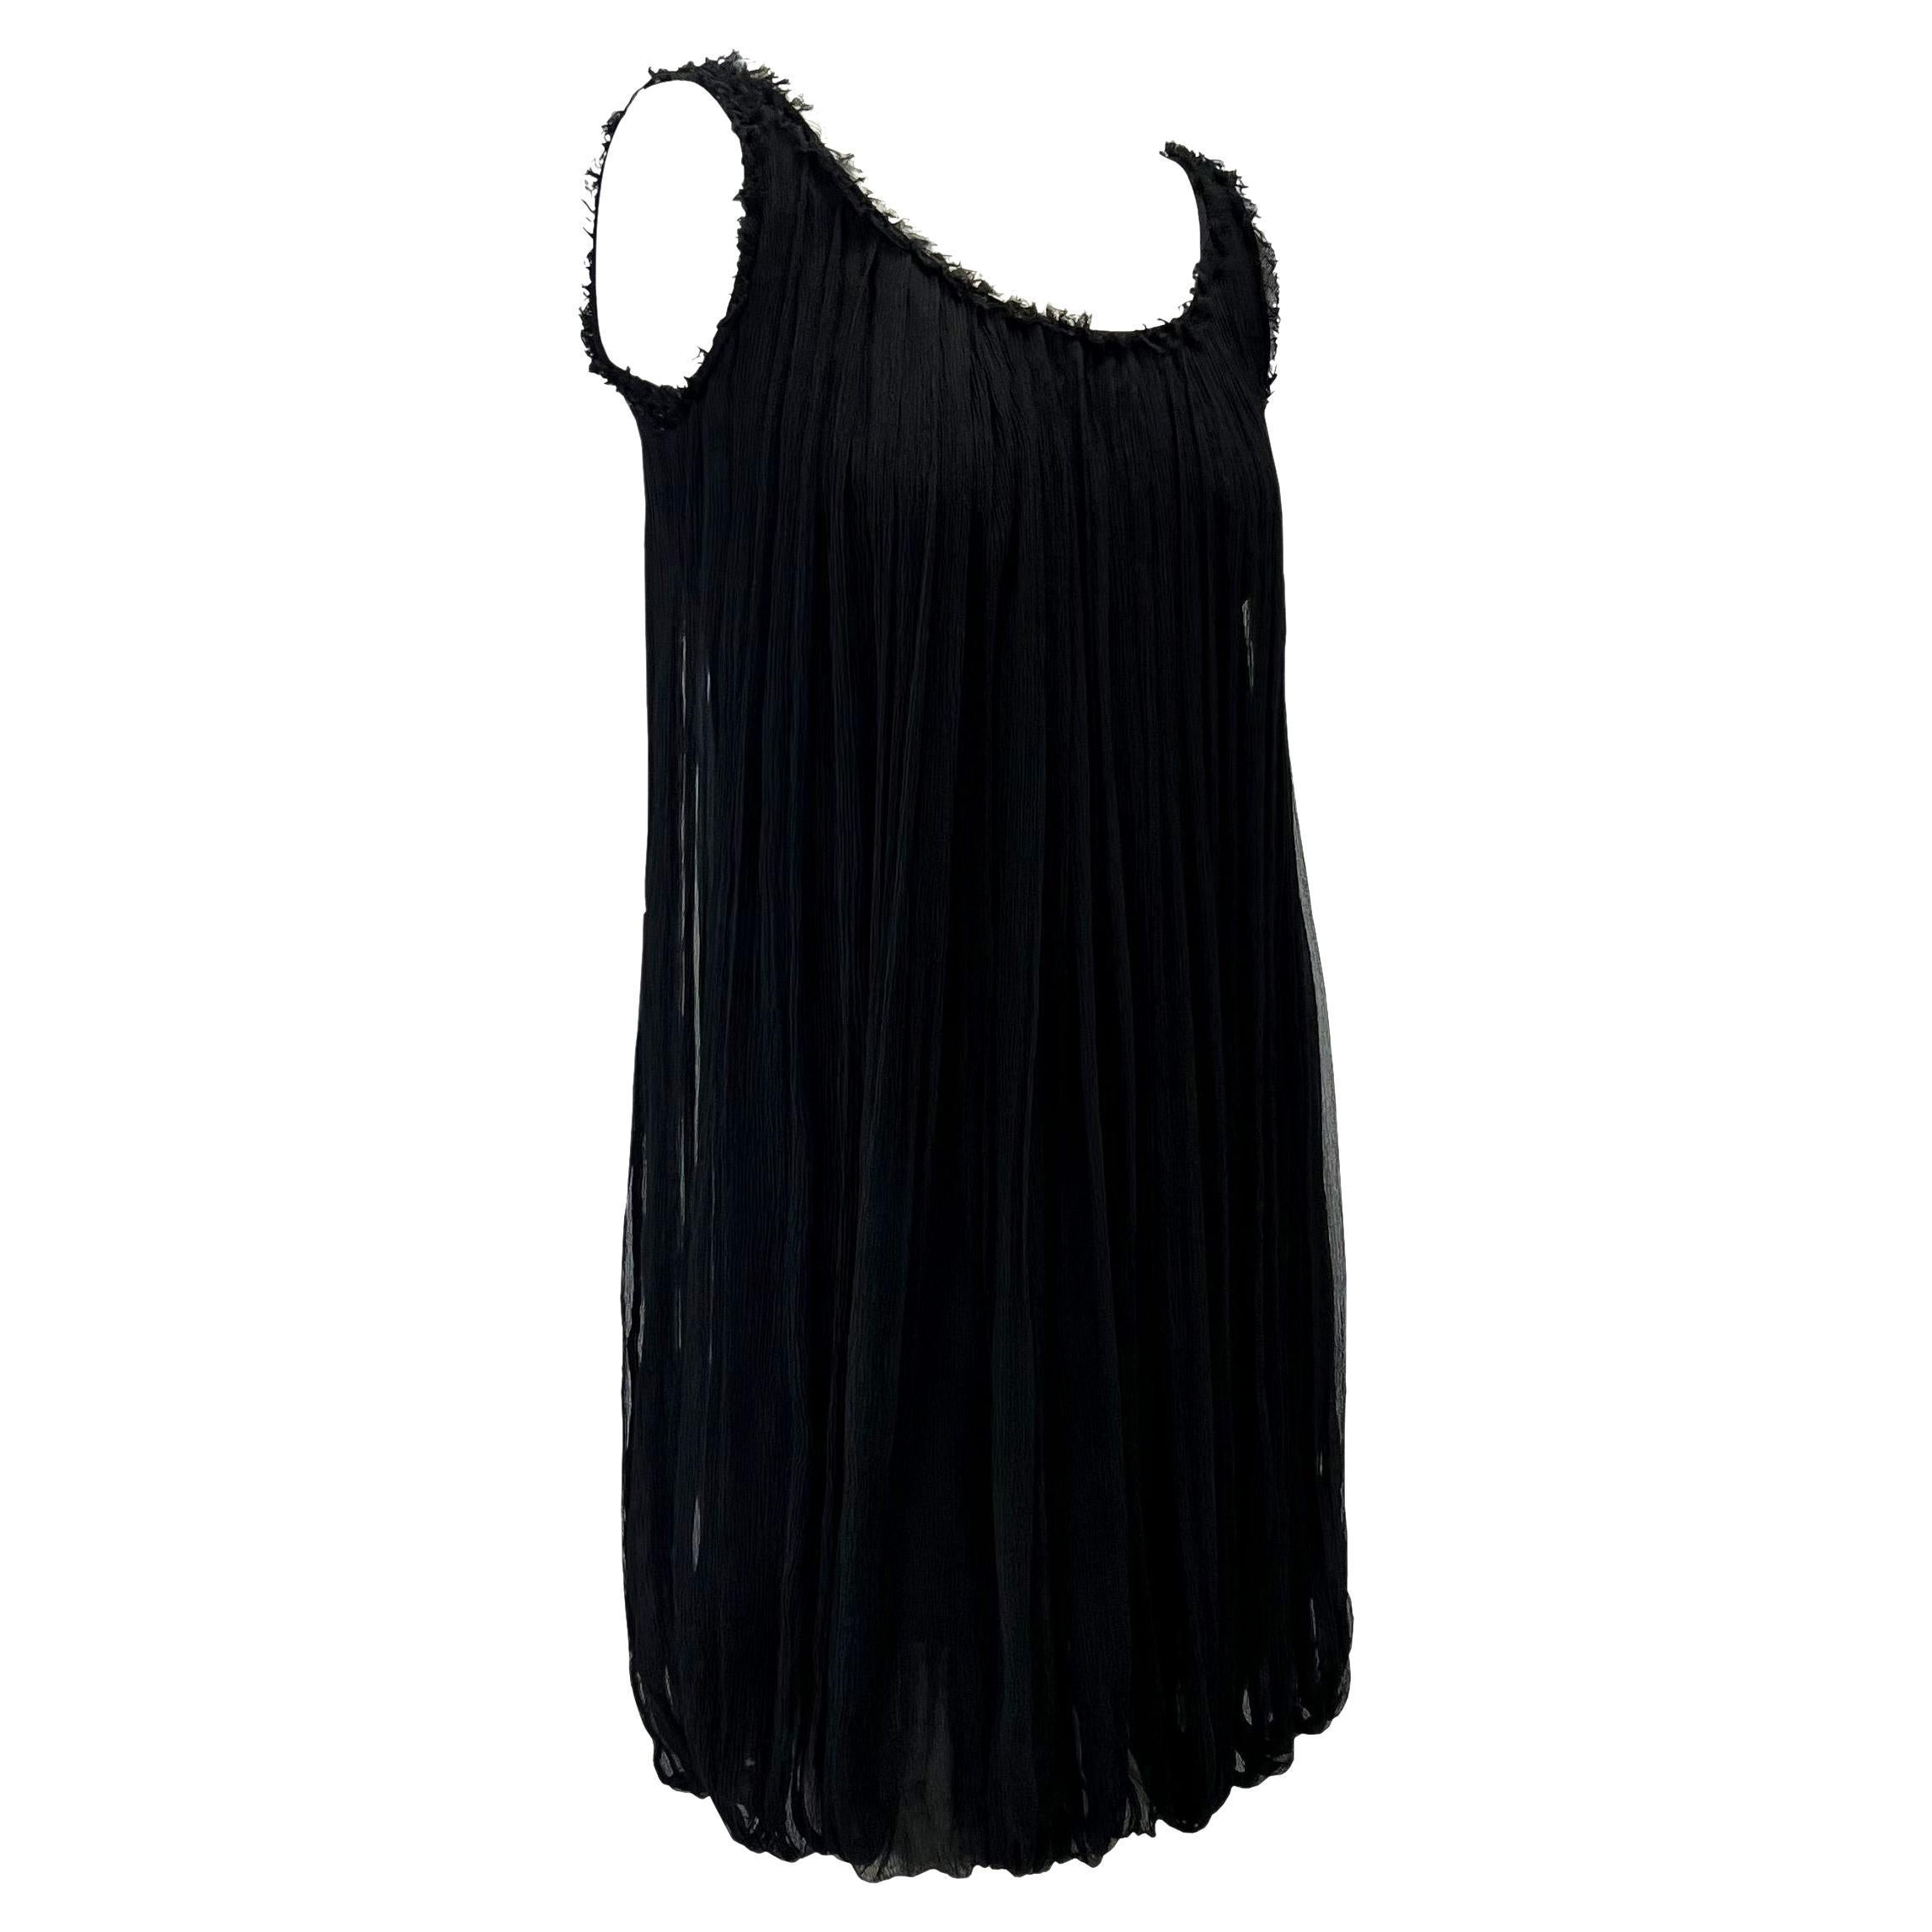 F/W 2001 Gucci by Tom Ford Black Tulle Sleeveless Shift Dress For Sale 3